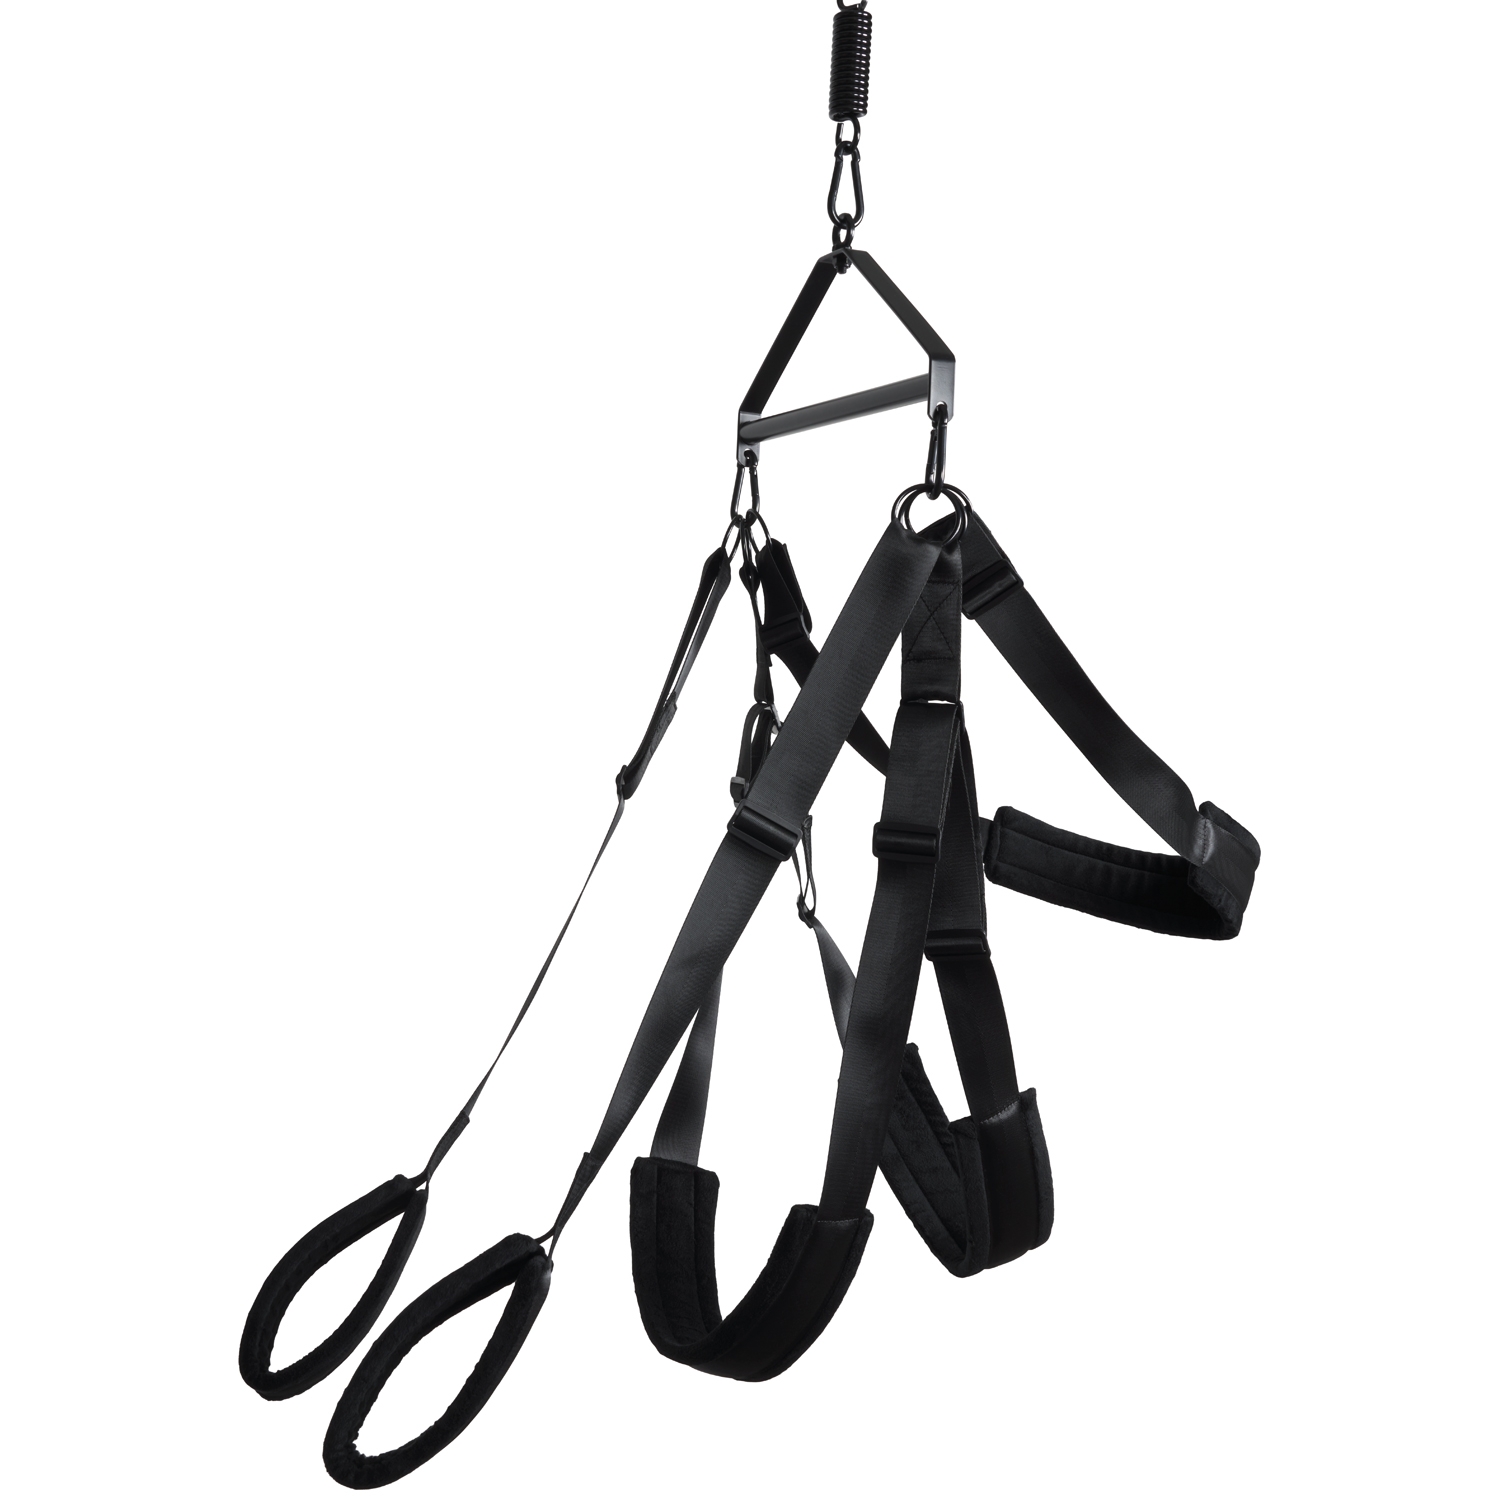 27113-obaie-deluxe-love-swing-bondage-set_02_product_q100